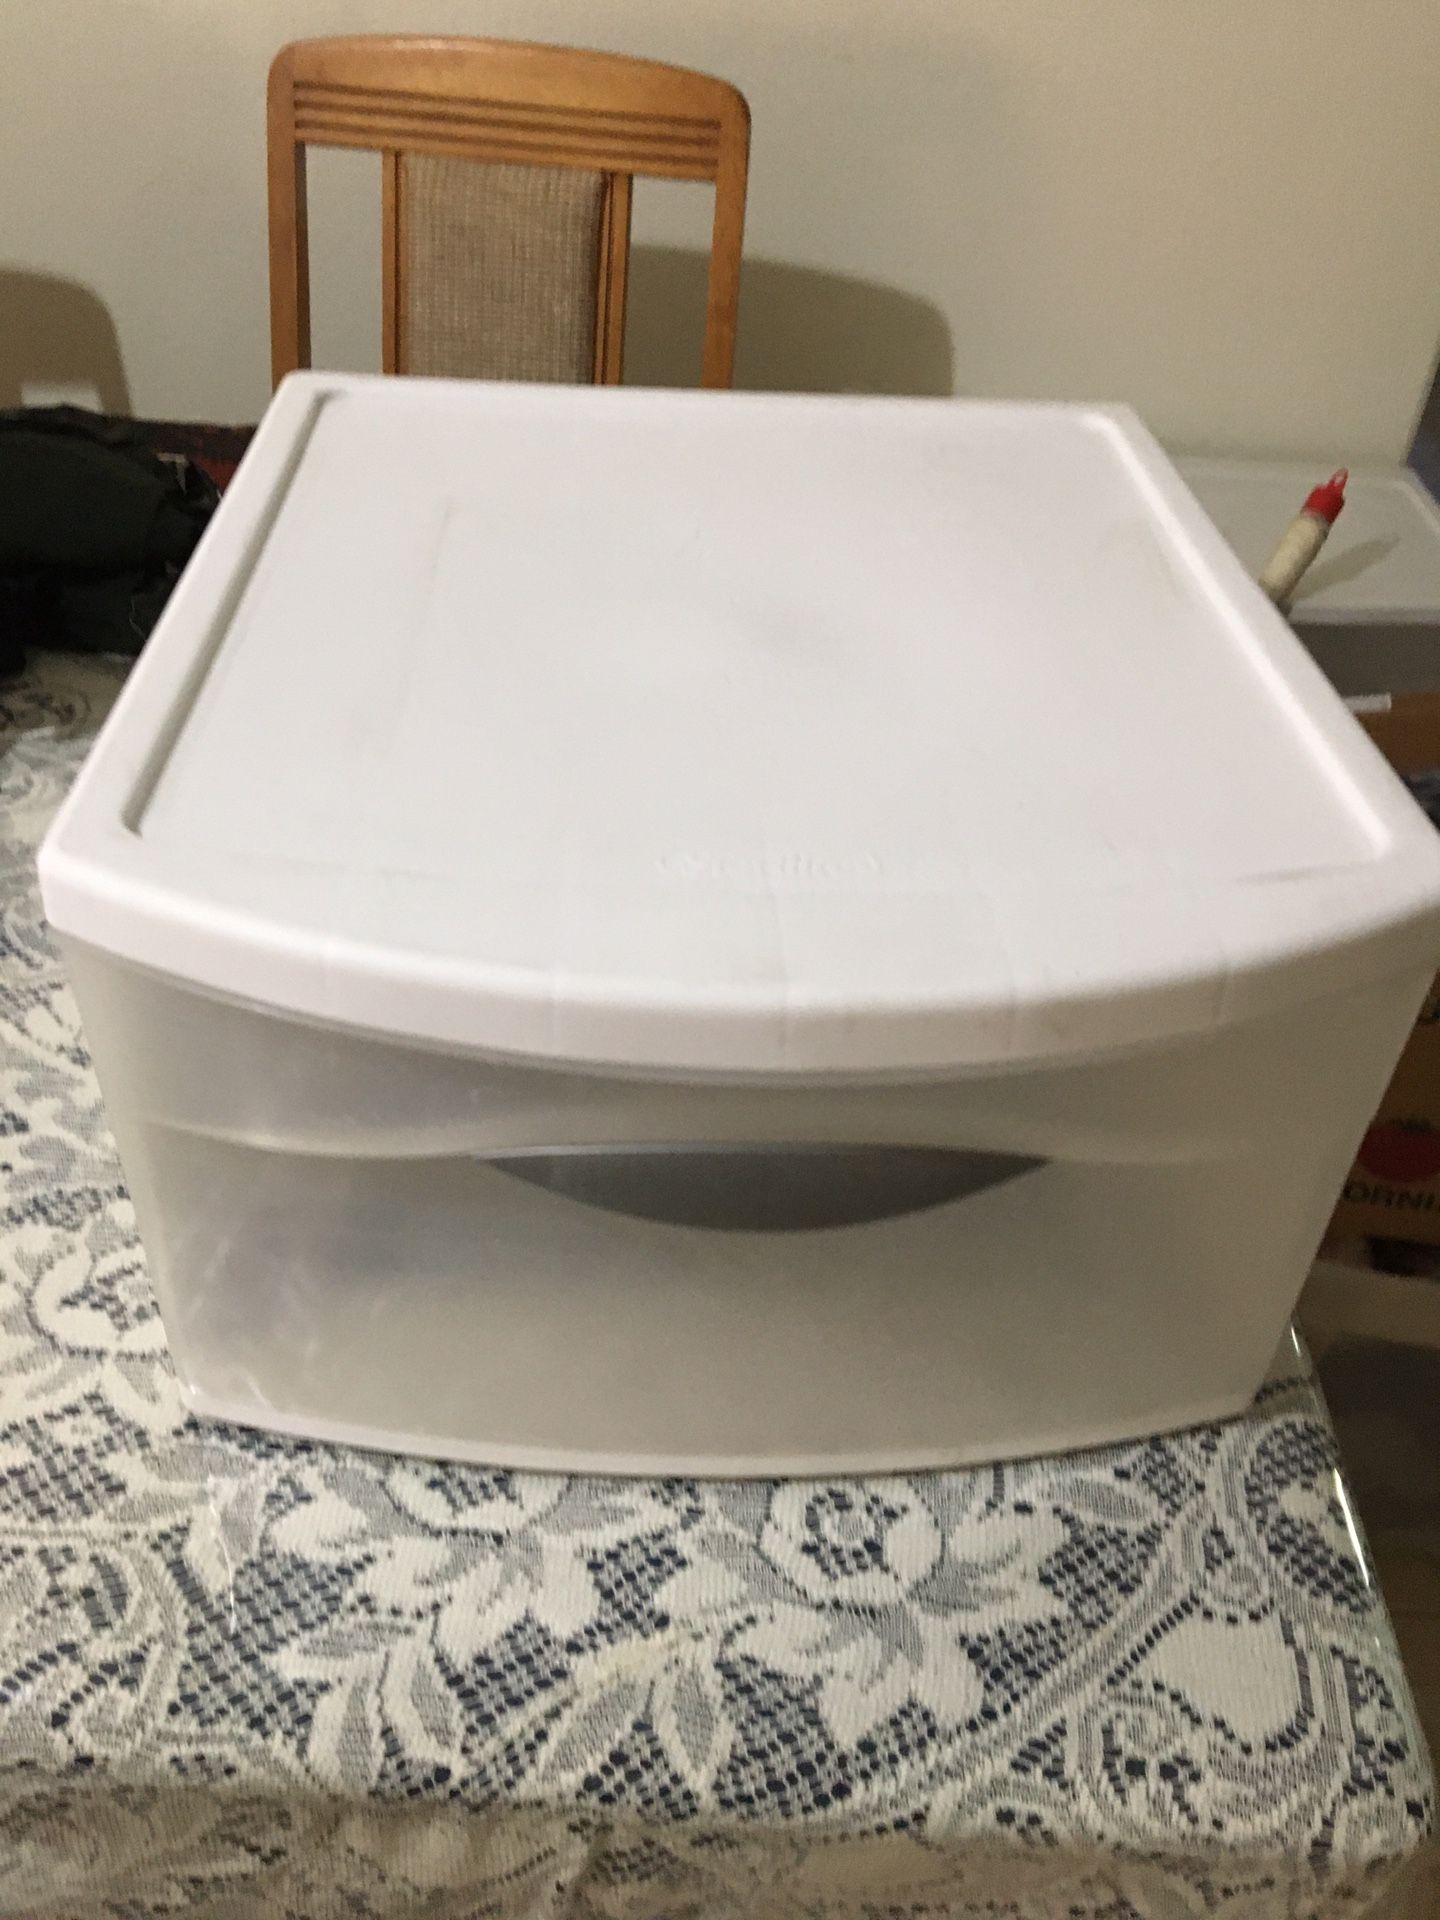 Plastic container for storage . Long 17 inches 1/2 width 15 inches 1/2 height 9 inches 1/2